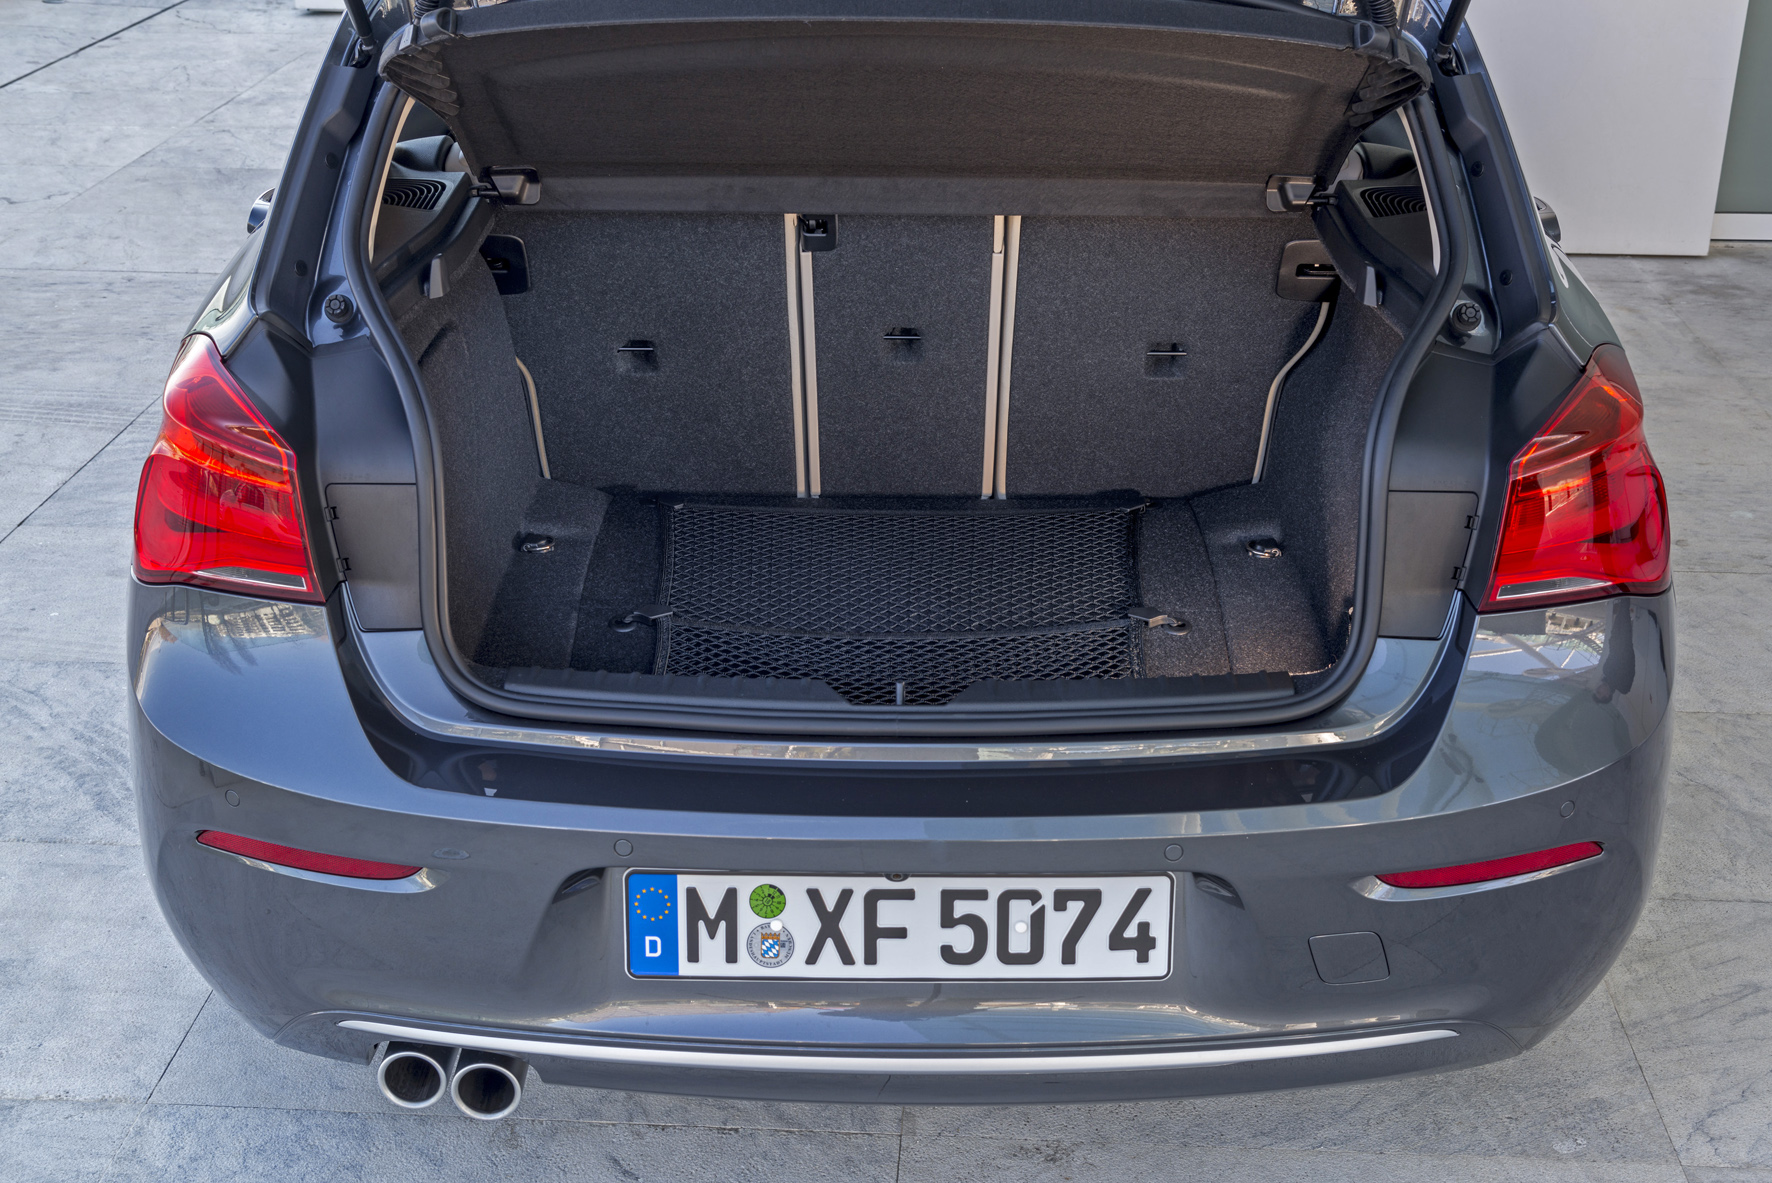 Open boot of a BMW 1 Series